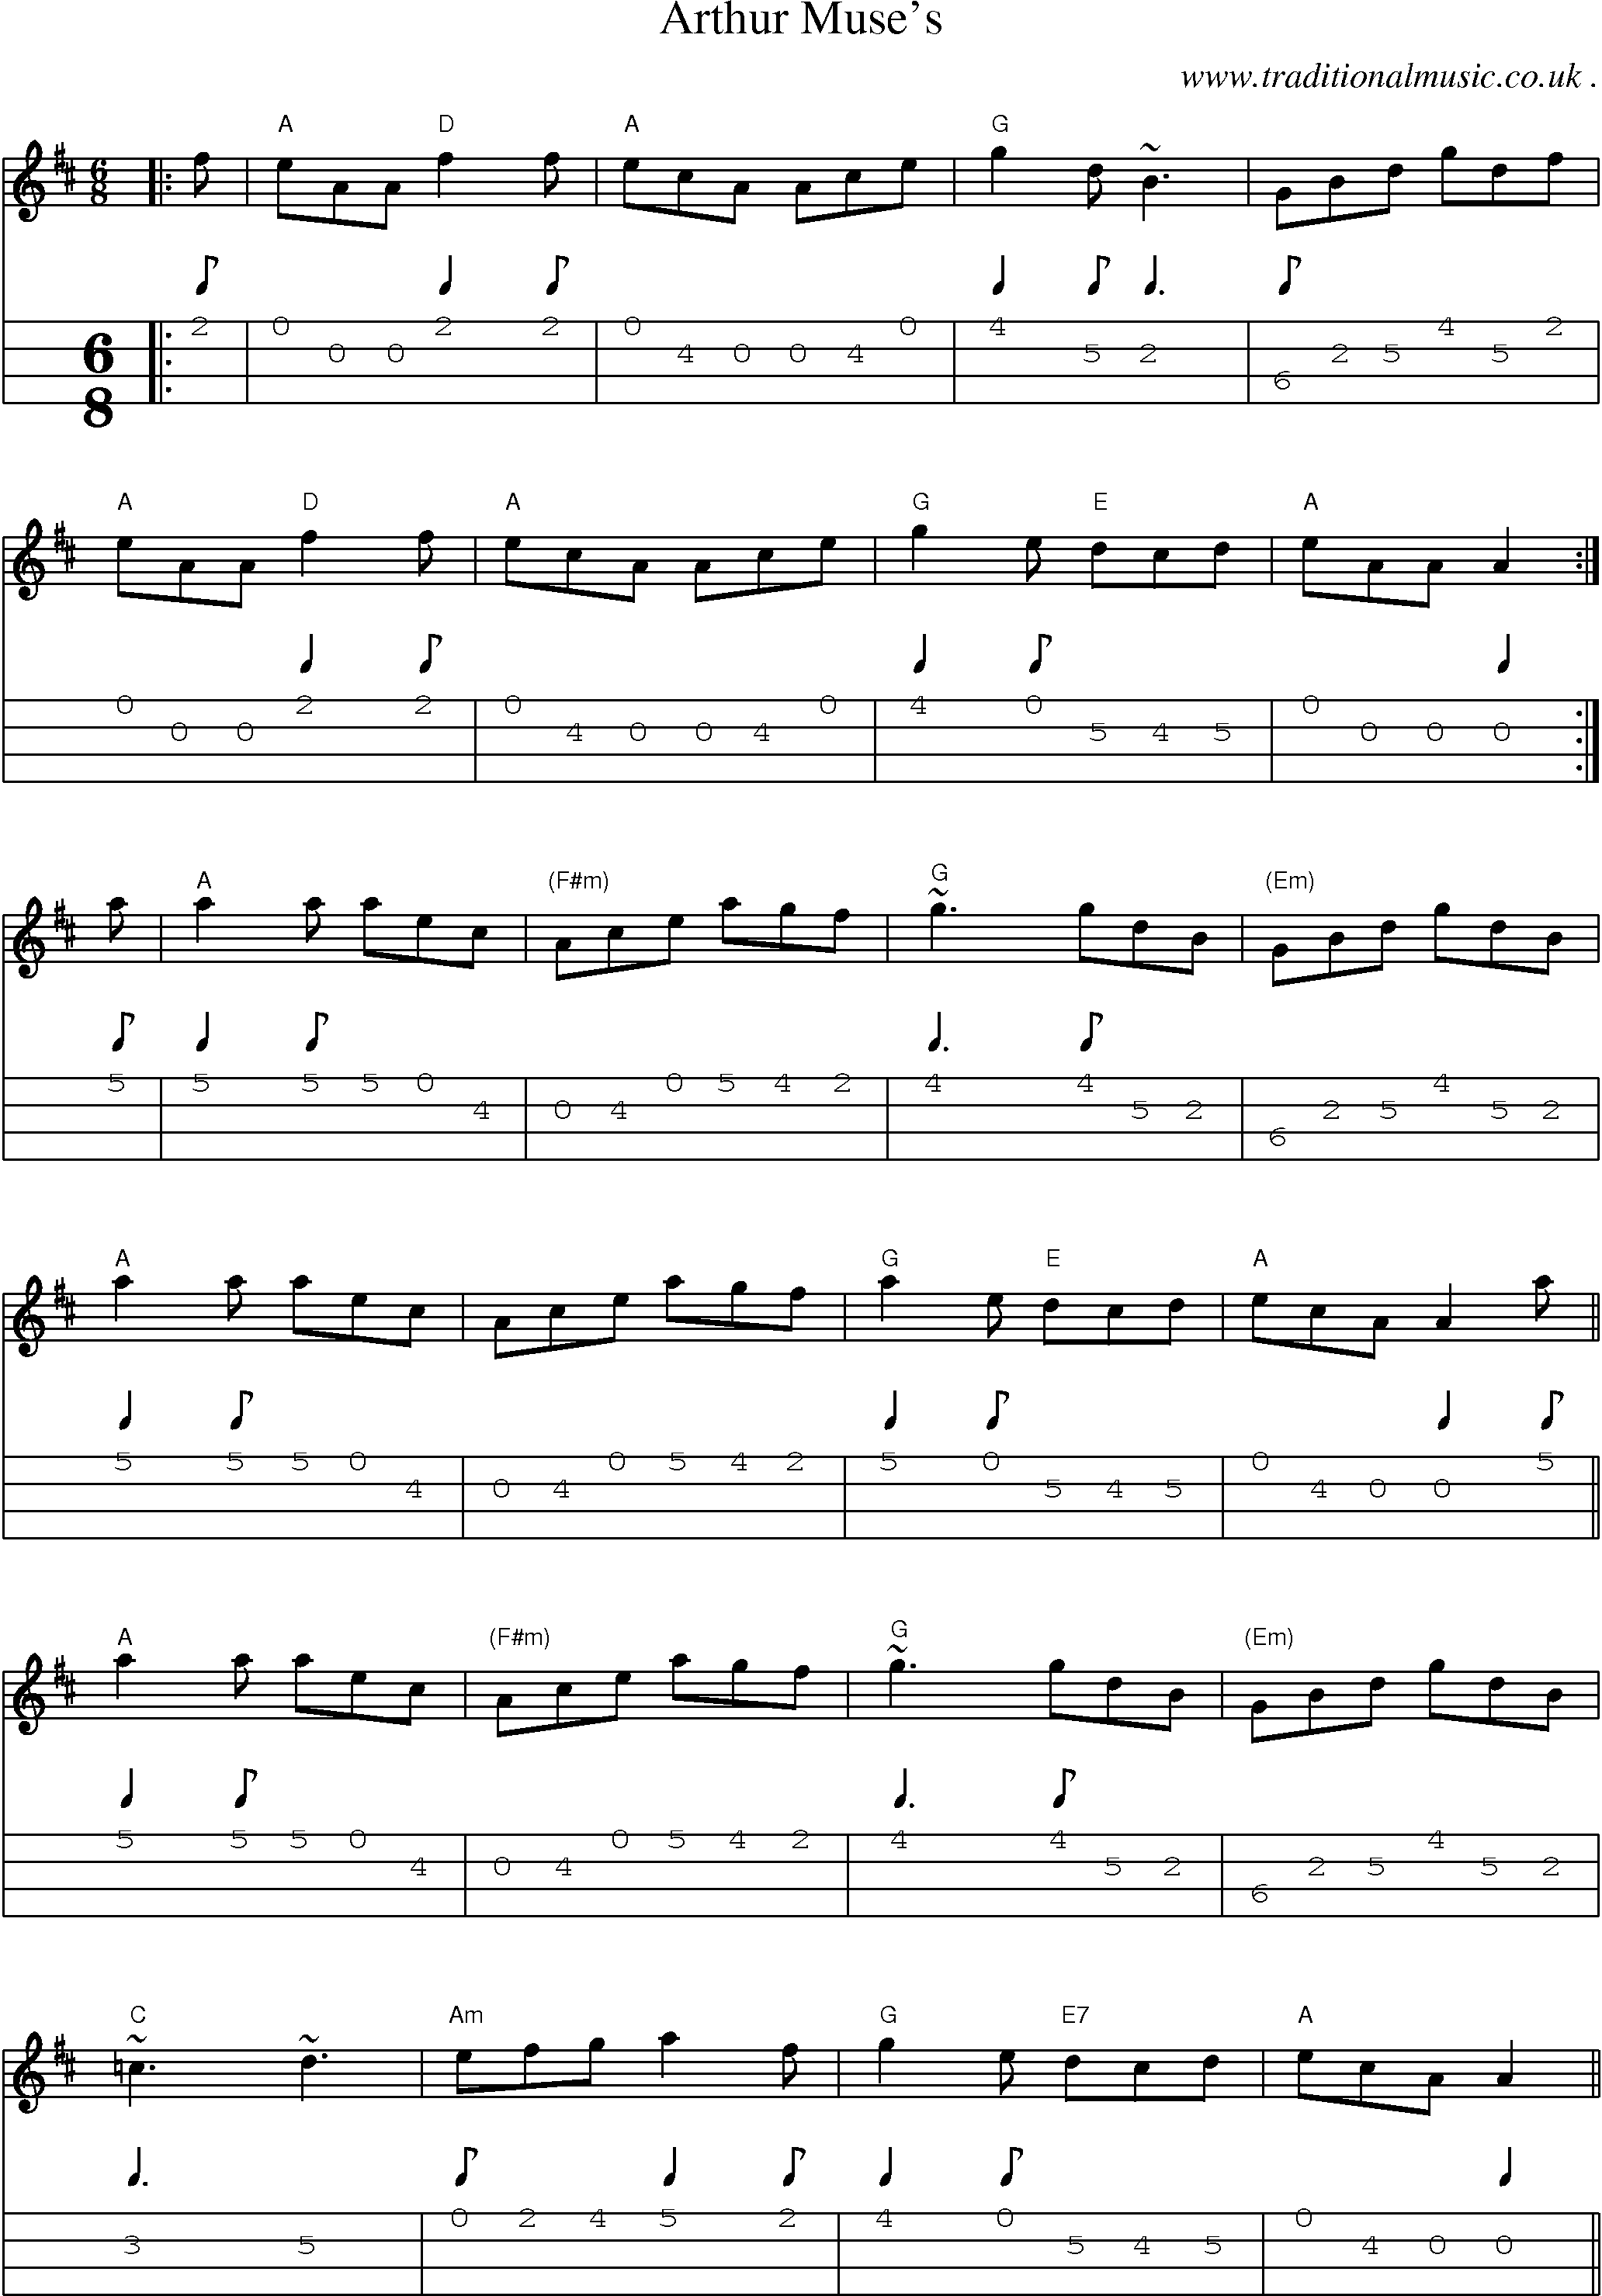 Music Score and Guitar Tabs for Arthur Muses